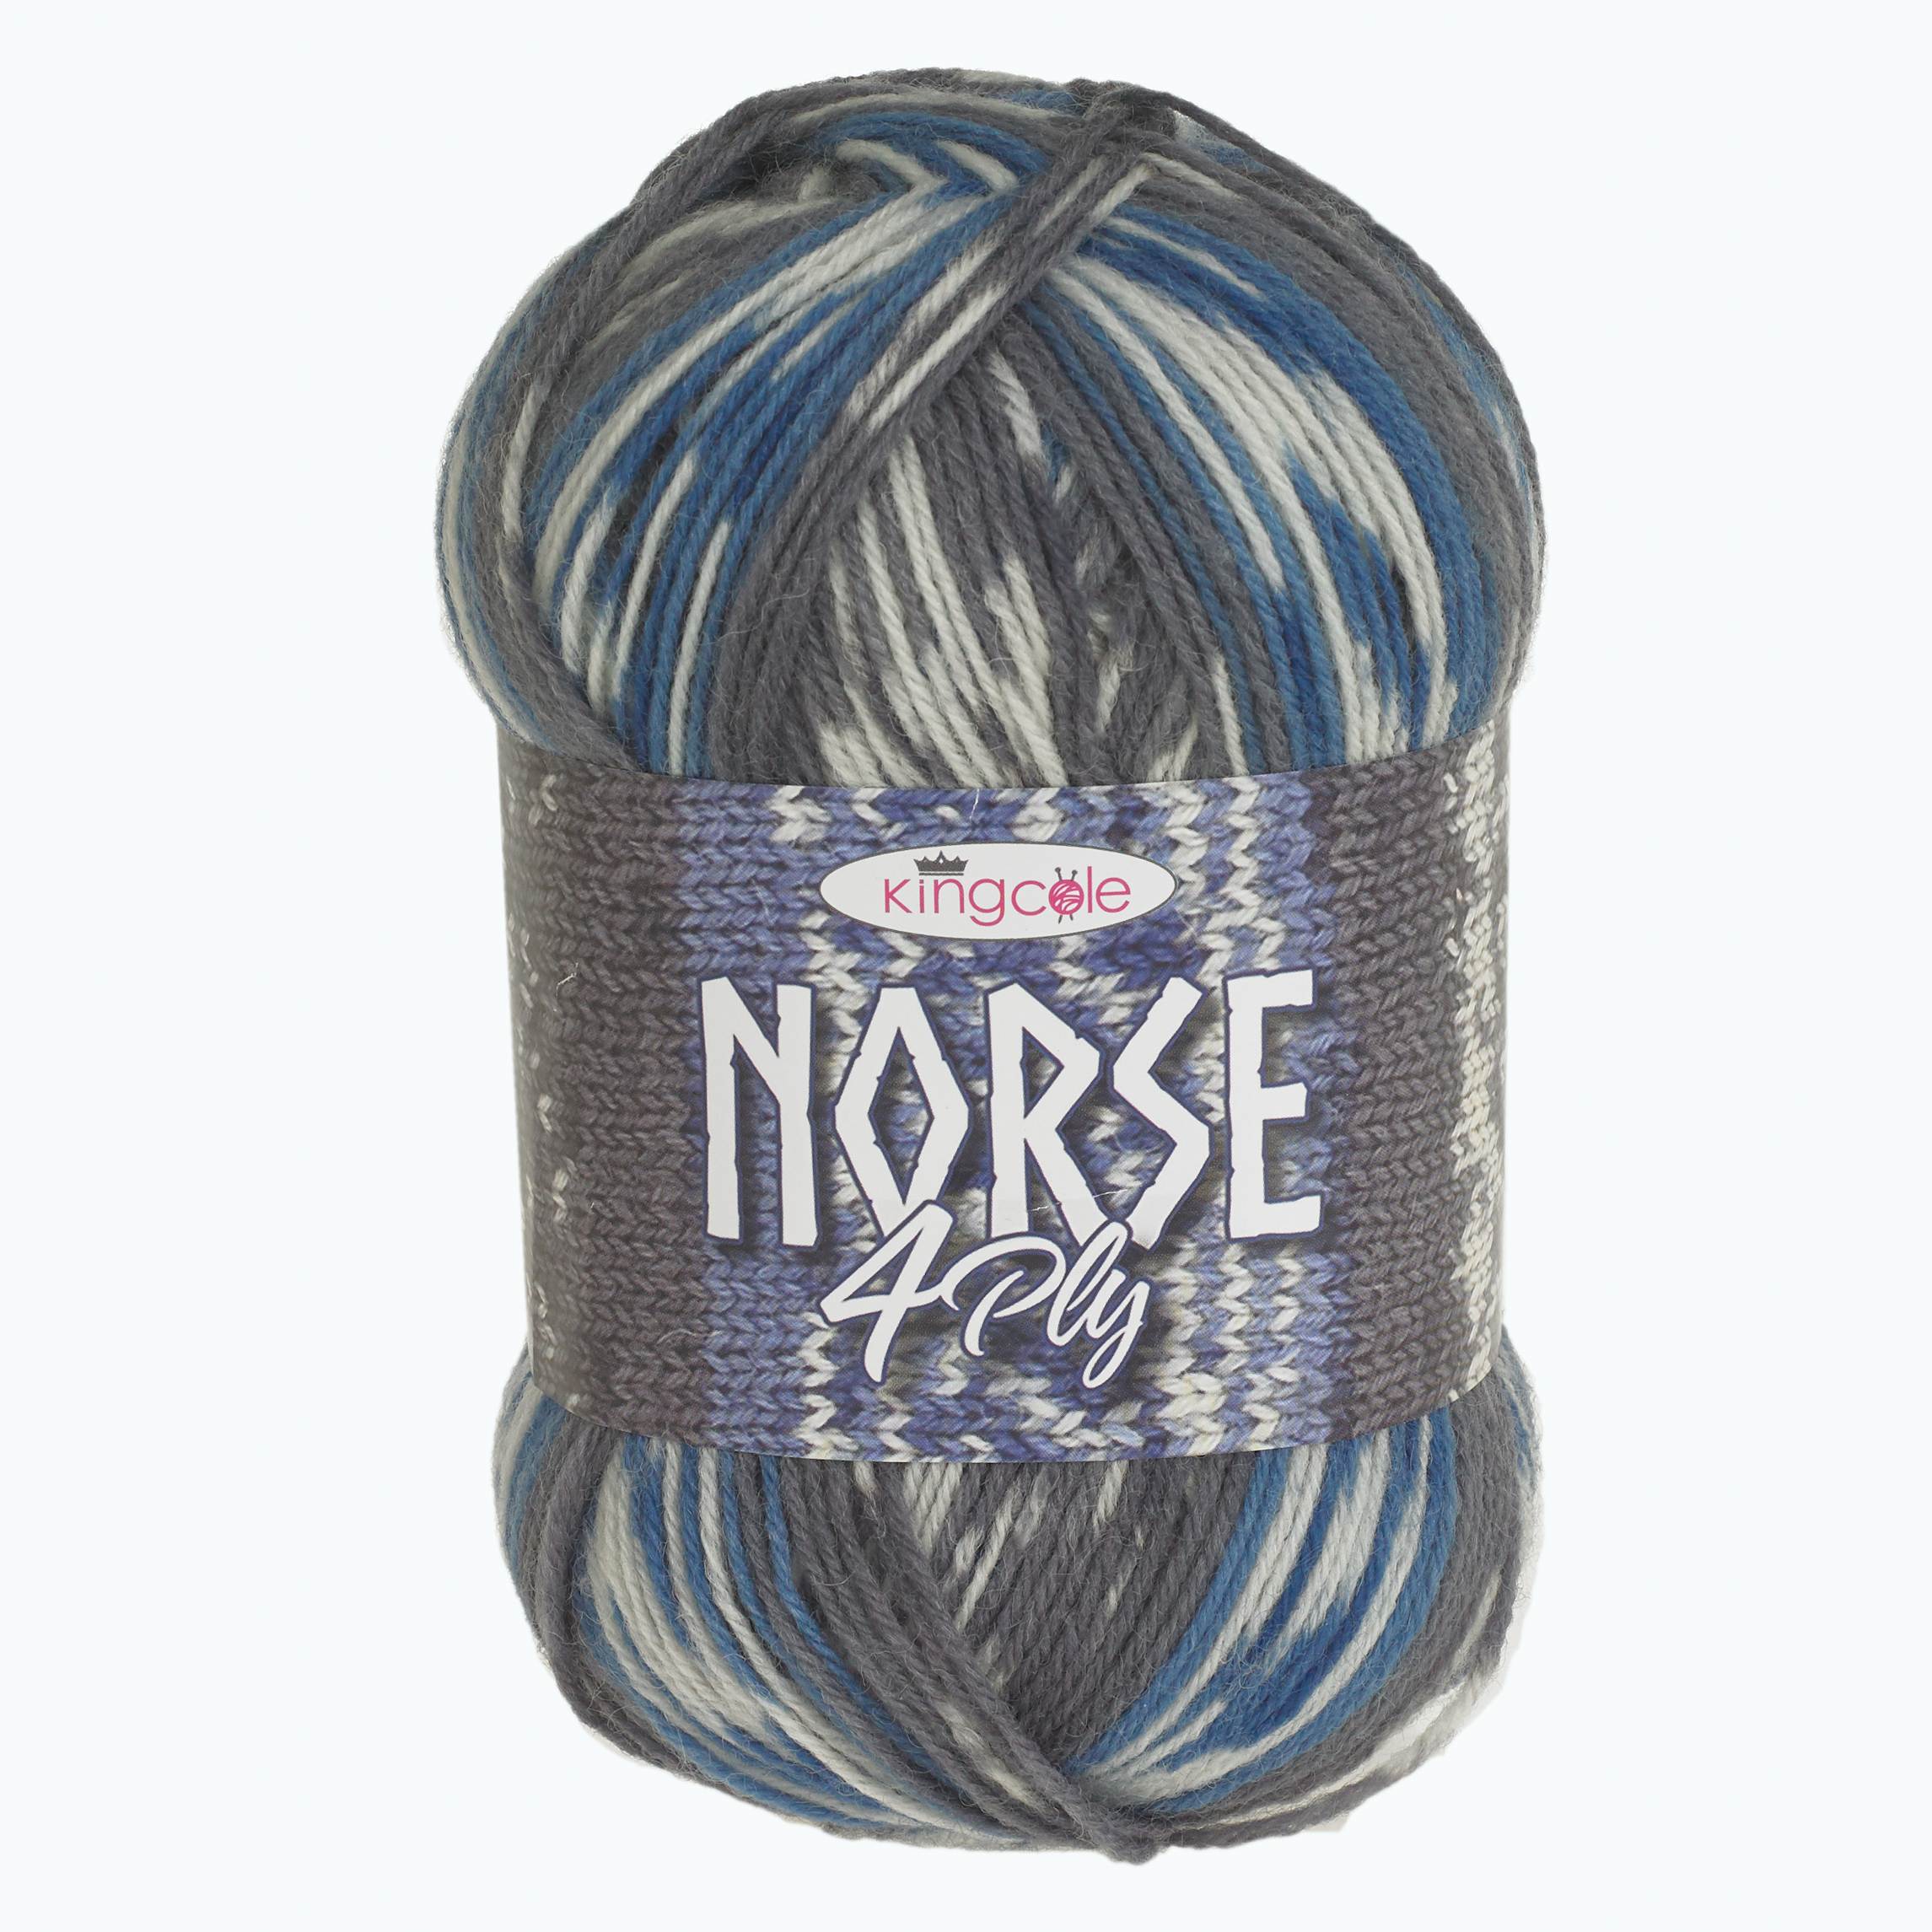 King Cole Norse 4Ply 405 Valli 100g